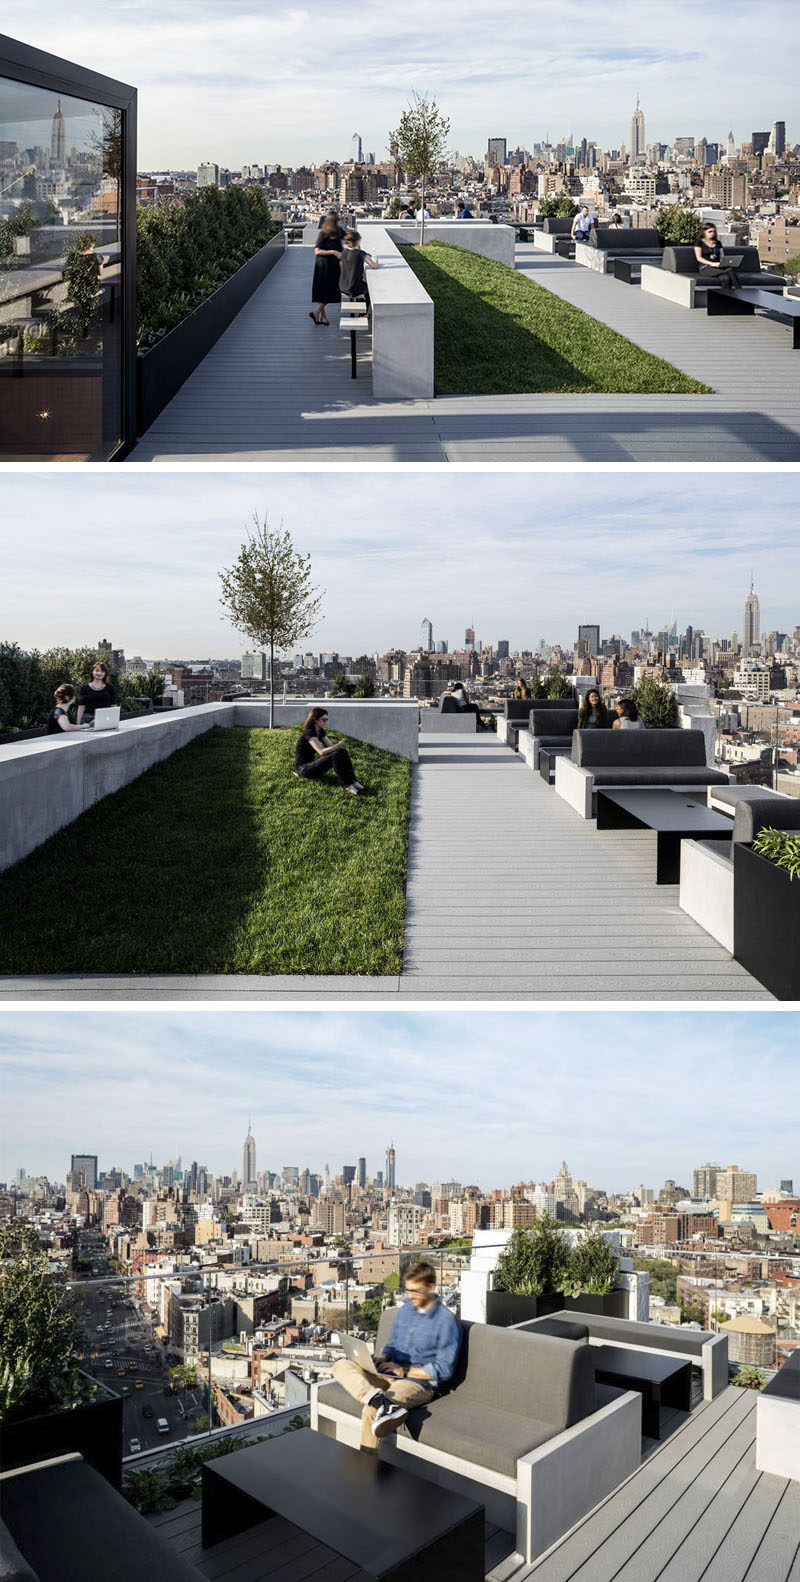 On the roof of this office space there's an amazing view of New York City, plenty of seats and a small grassy hill for a more relaxed break time.